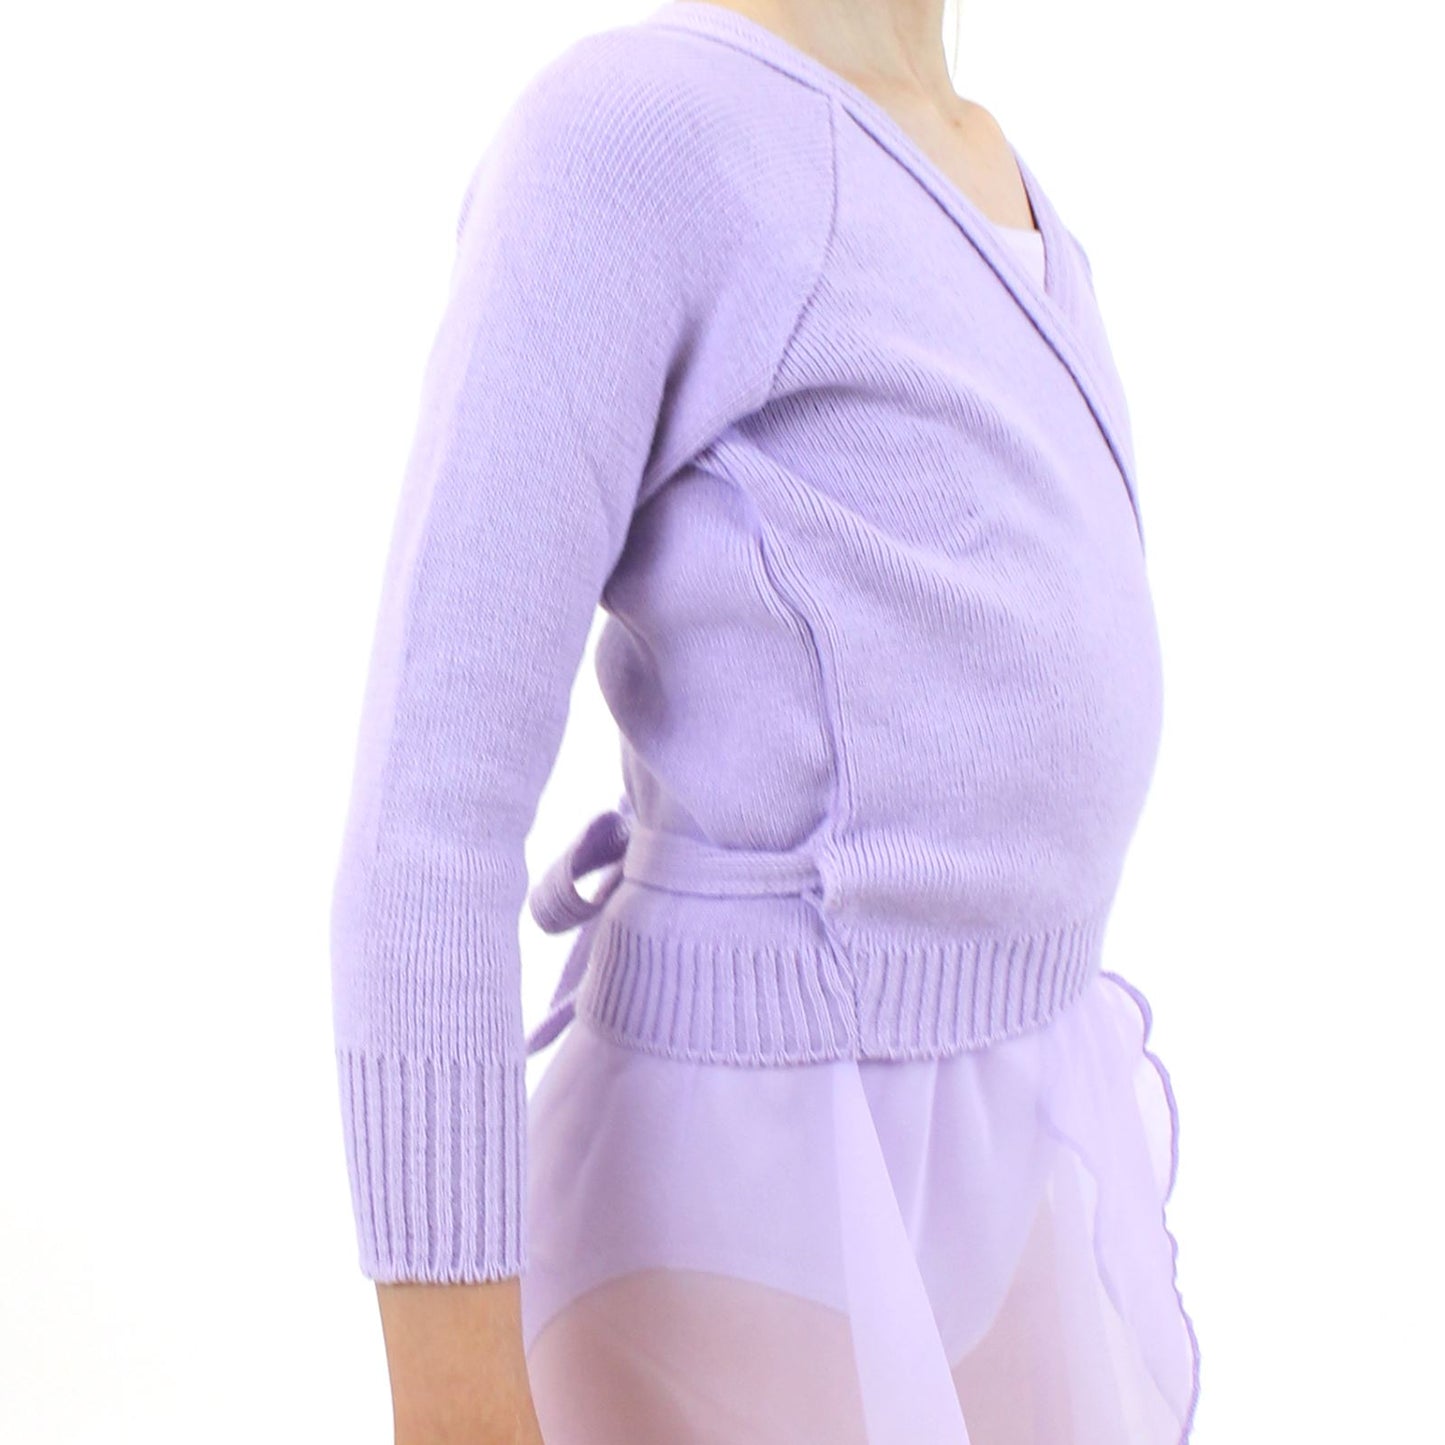 KNITTED ACRYLIC CROSSOVER BALLET / ICE SKATING CARDIGAN Knitwear Dancers World 